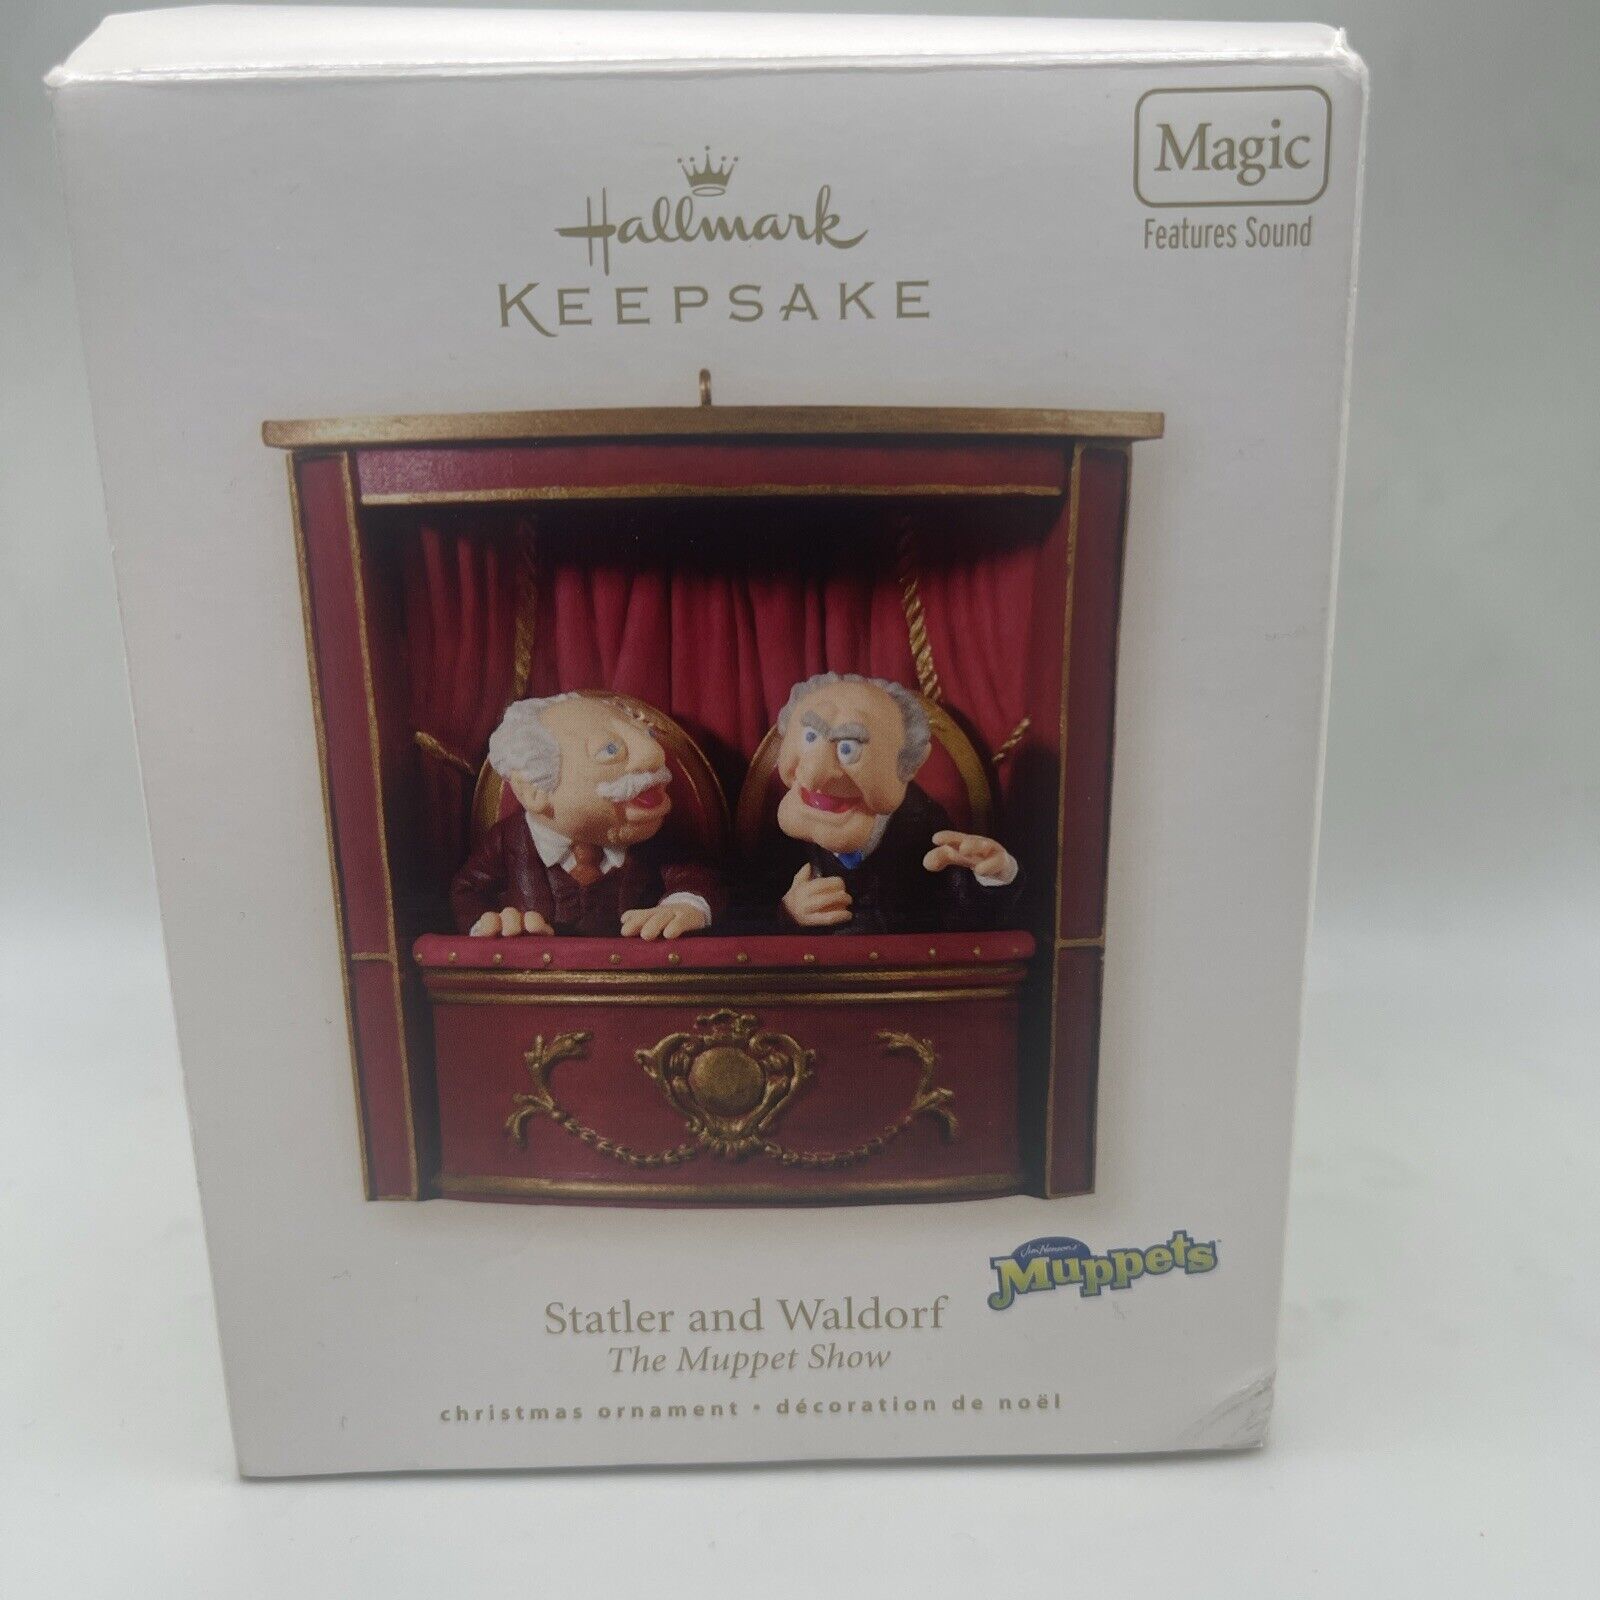 Hallmark Statler and Waldorf The Muppet Show 2008 Christmas Ornament Sound